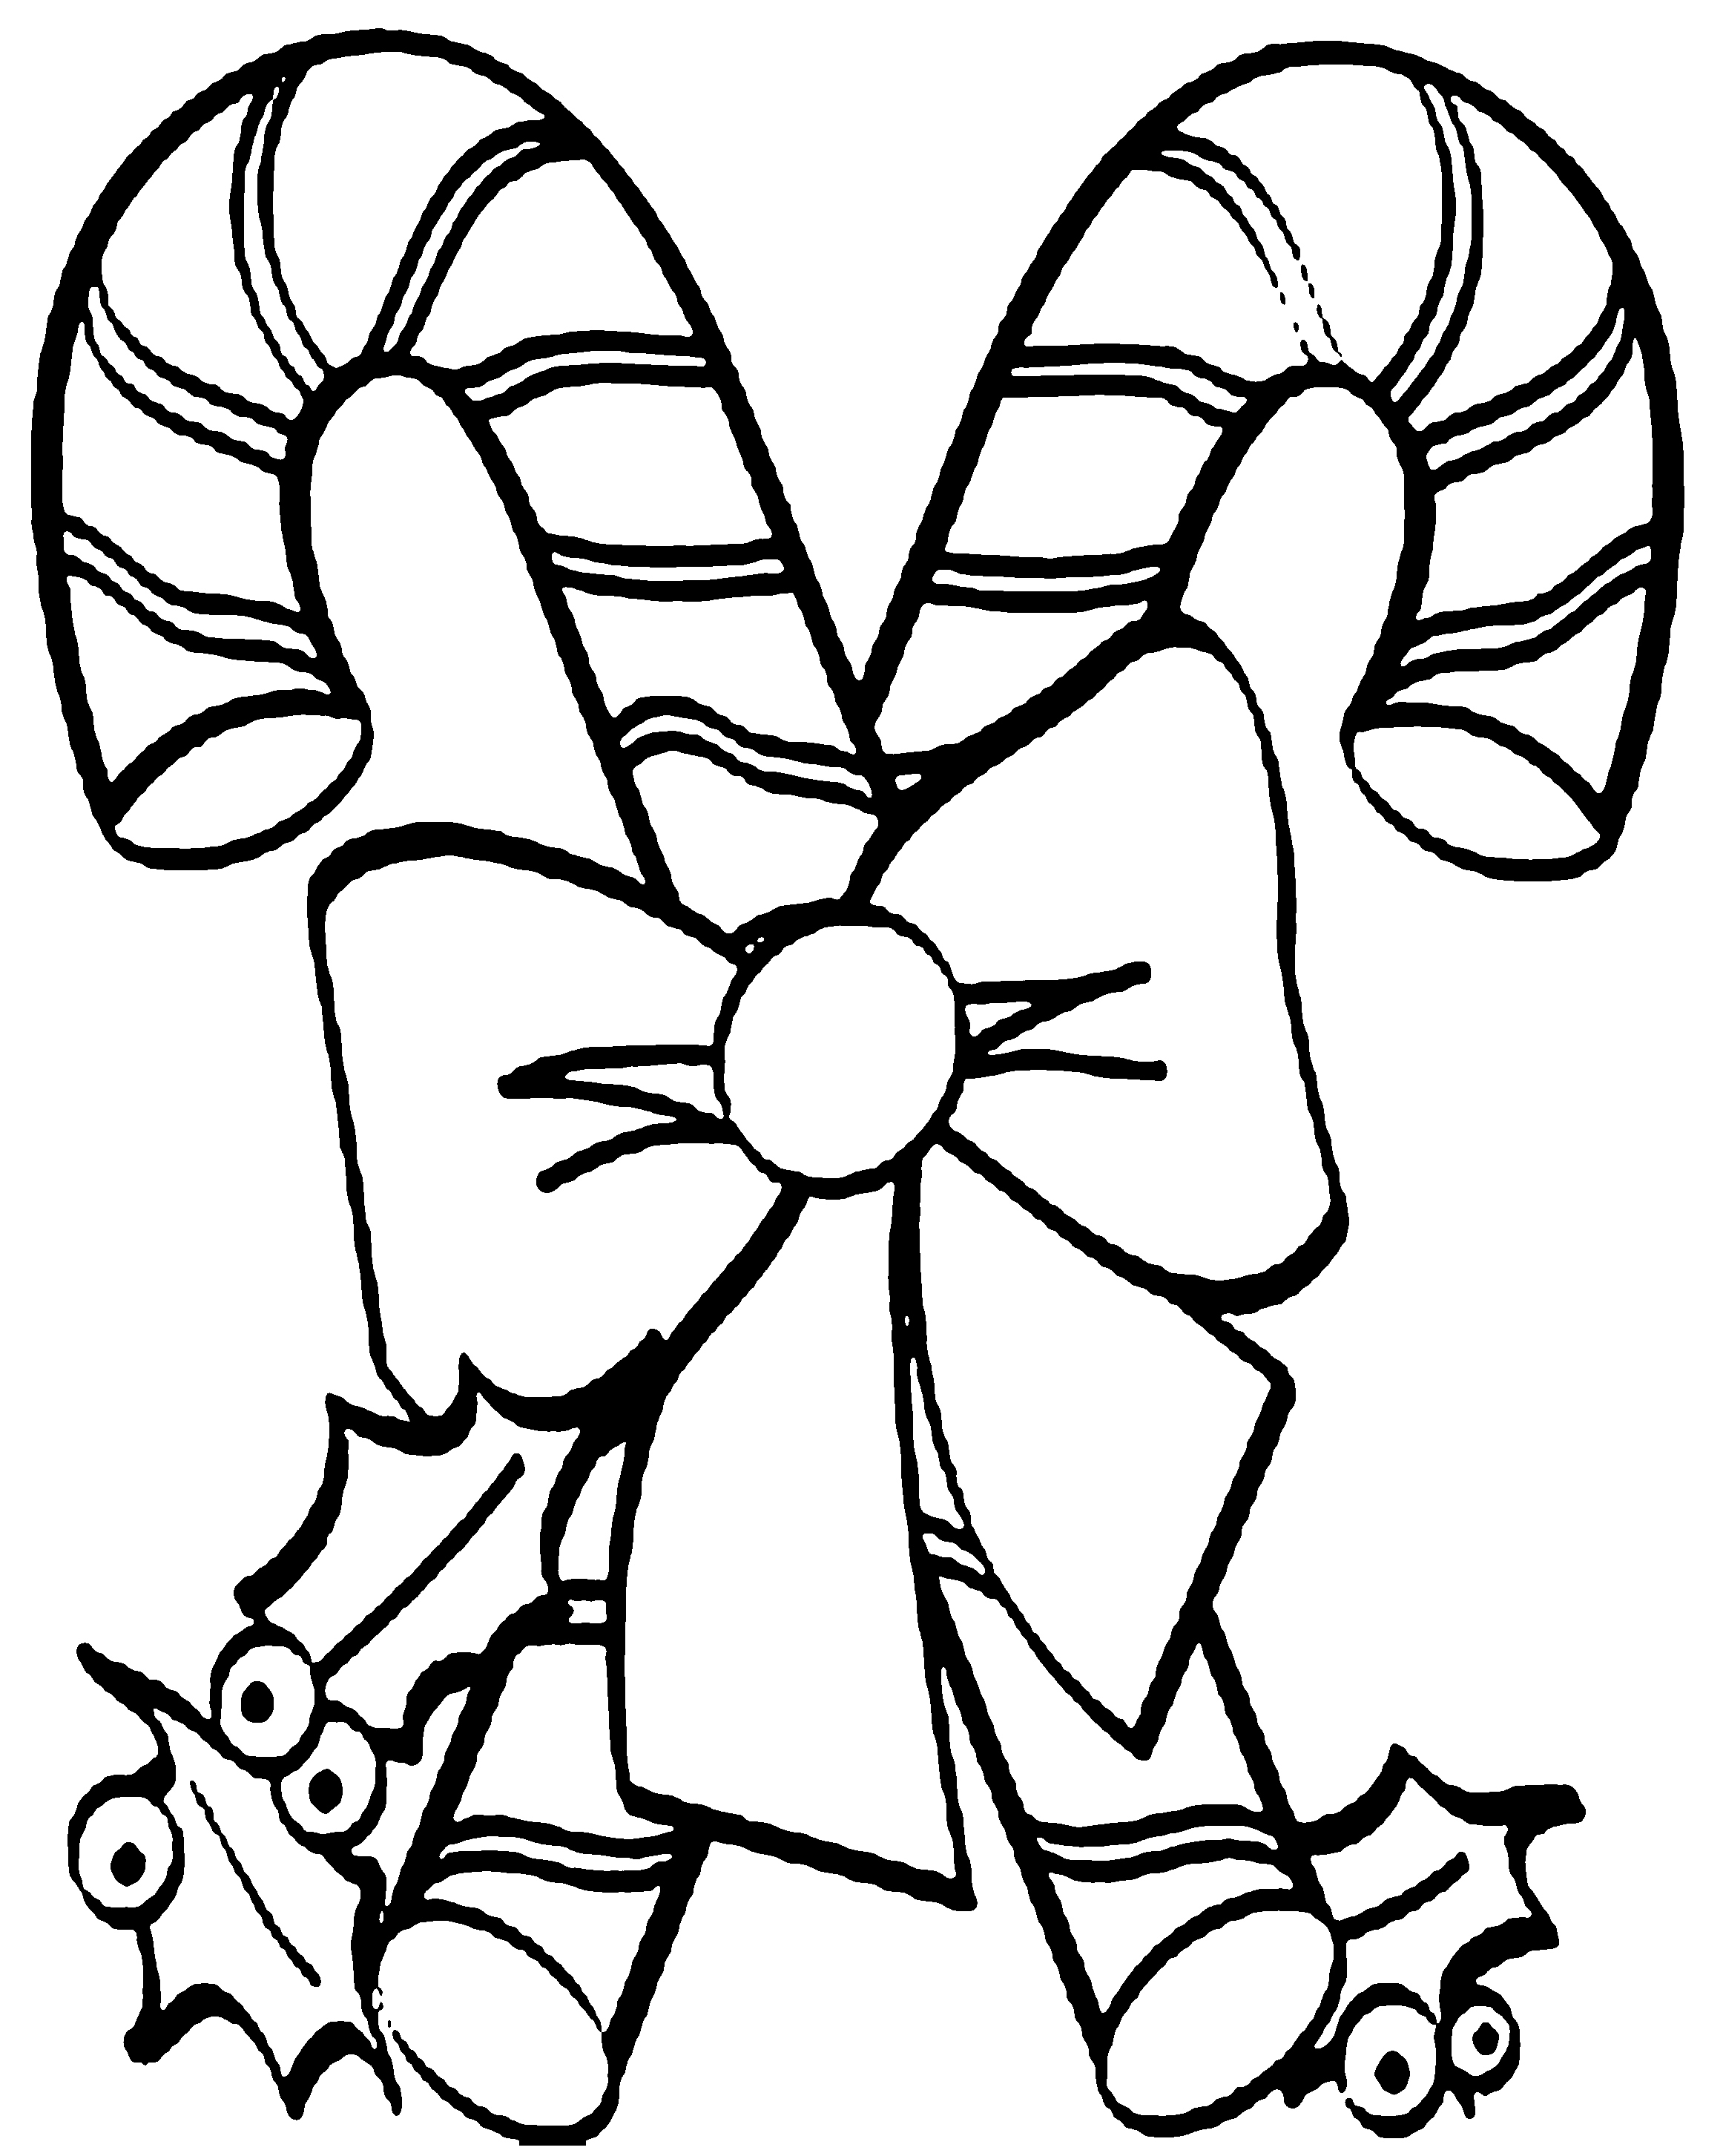 Download Christmas Coloring Pages for Preschoolers - Best Coloring ...